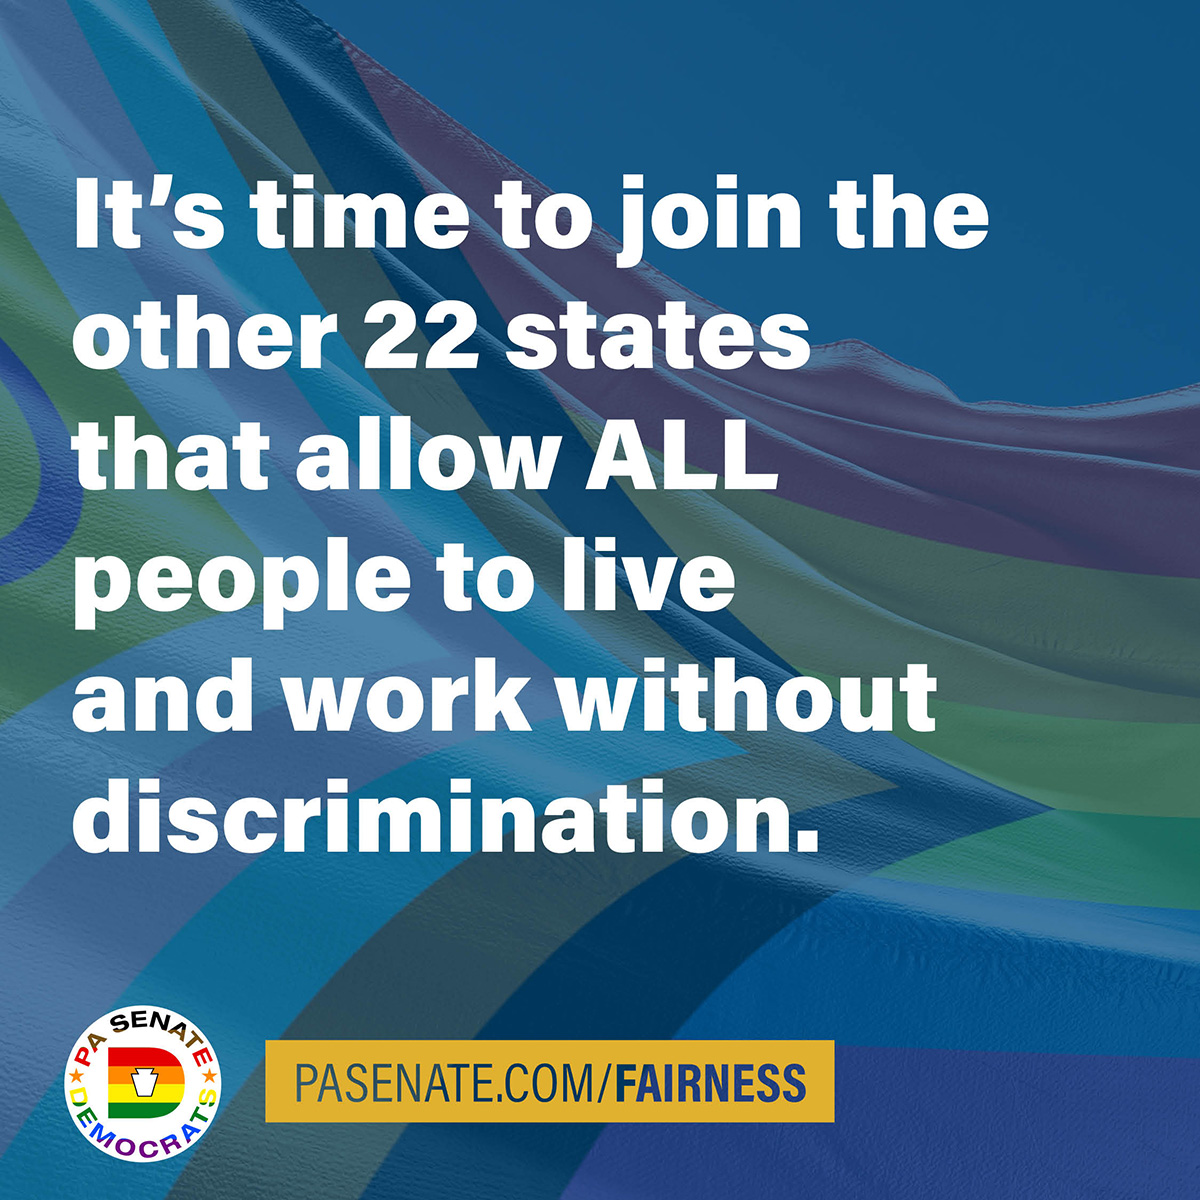 It’s time to join the other 22 states that allow ALL people to live and work without discrimination.